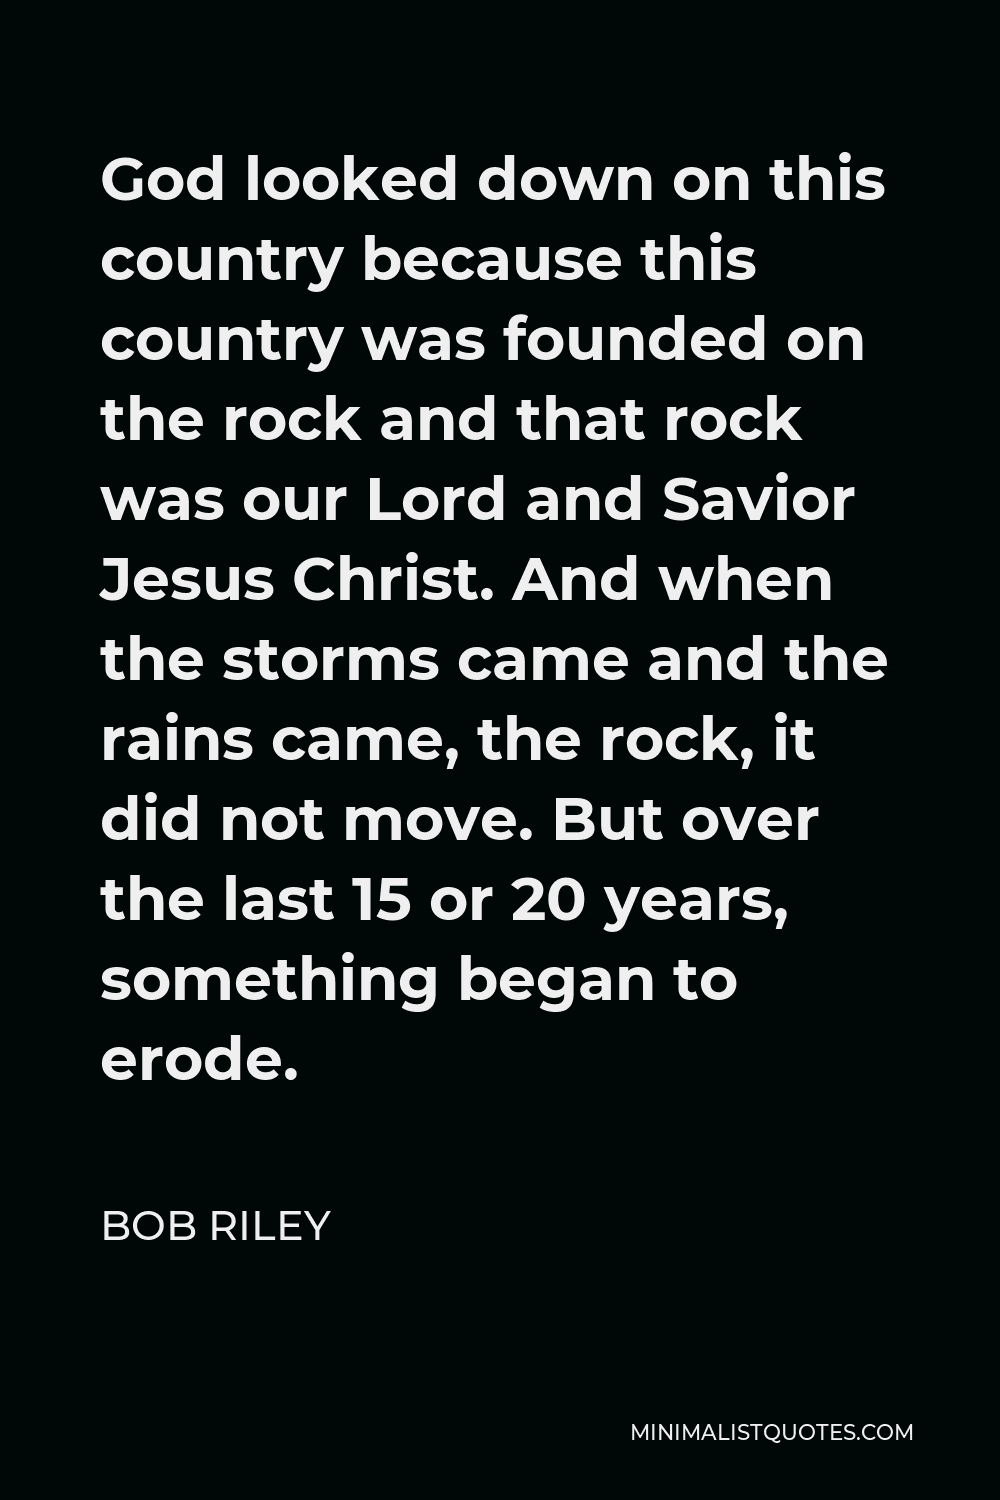 Bob Riley Quote - God looked down on this country because this country was founded on the rock and that rock was our Lord and Savior Jesus Christ. And when the storms came and the rains came, the rock, it did not move. But over the last 15 or 20 years, something began to erode.